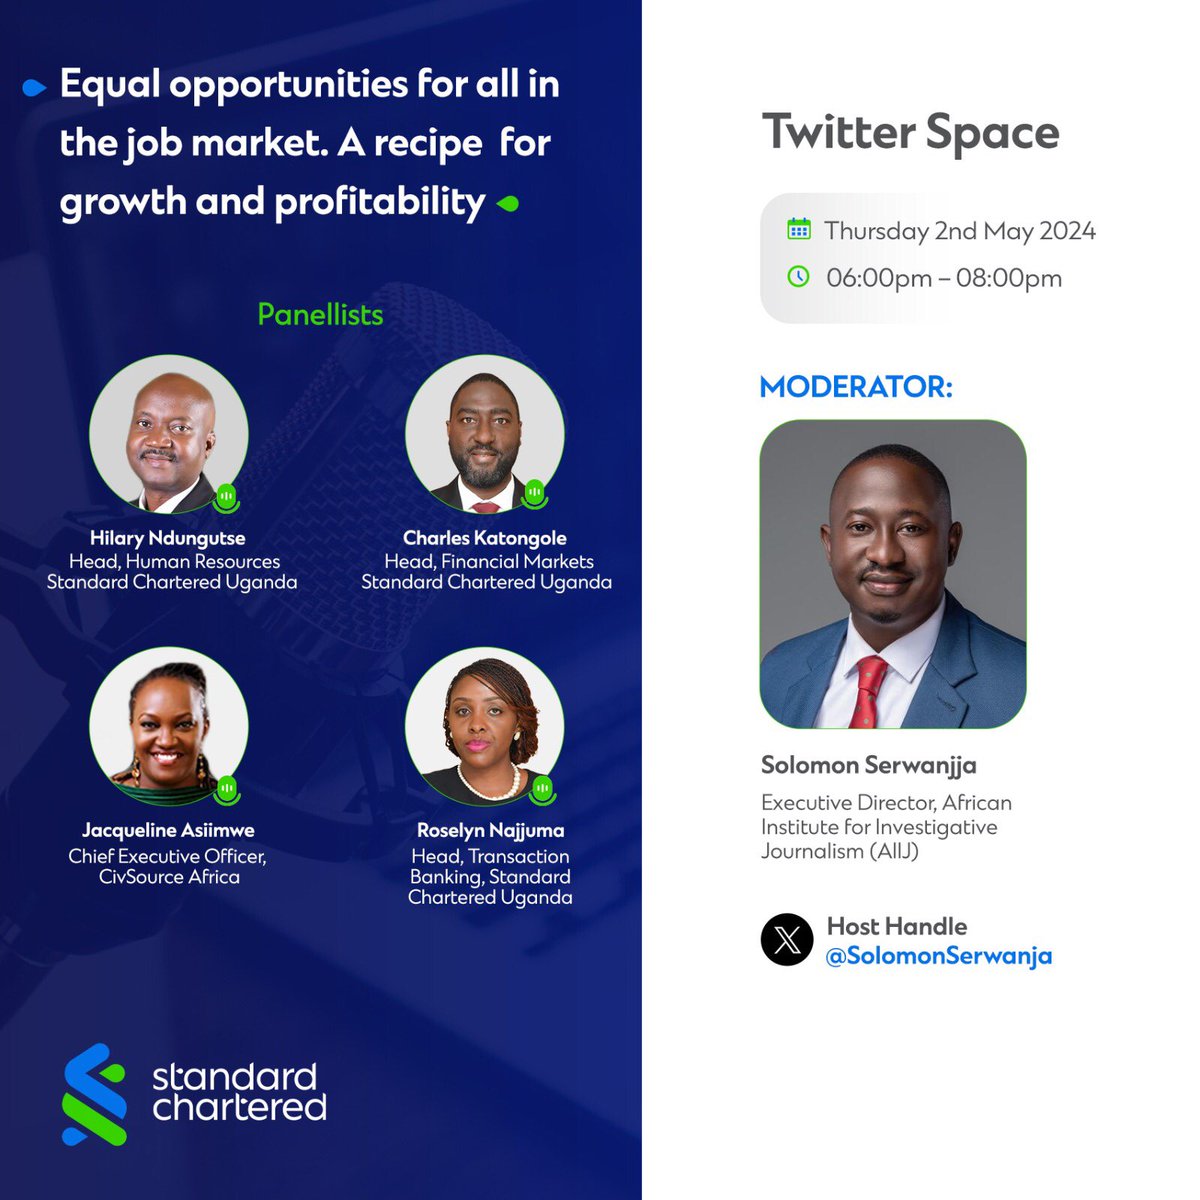 Today at exactly 6:00pm with @SolomonSerwanjj and team will be a Twitter Space about Equal opportunities for all in the job market. A recipe for growth and profitability courtesy of @StanChartUGA. Don’t miss! #HereForGood